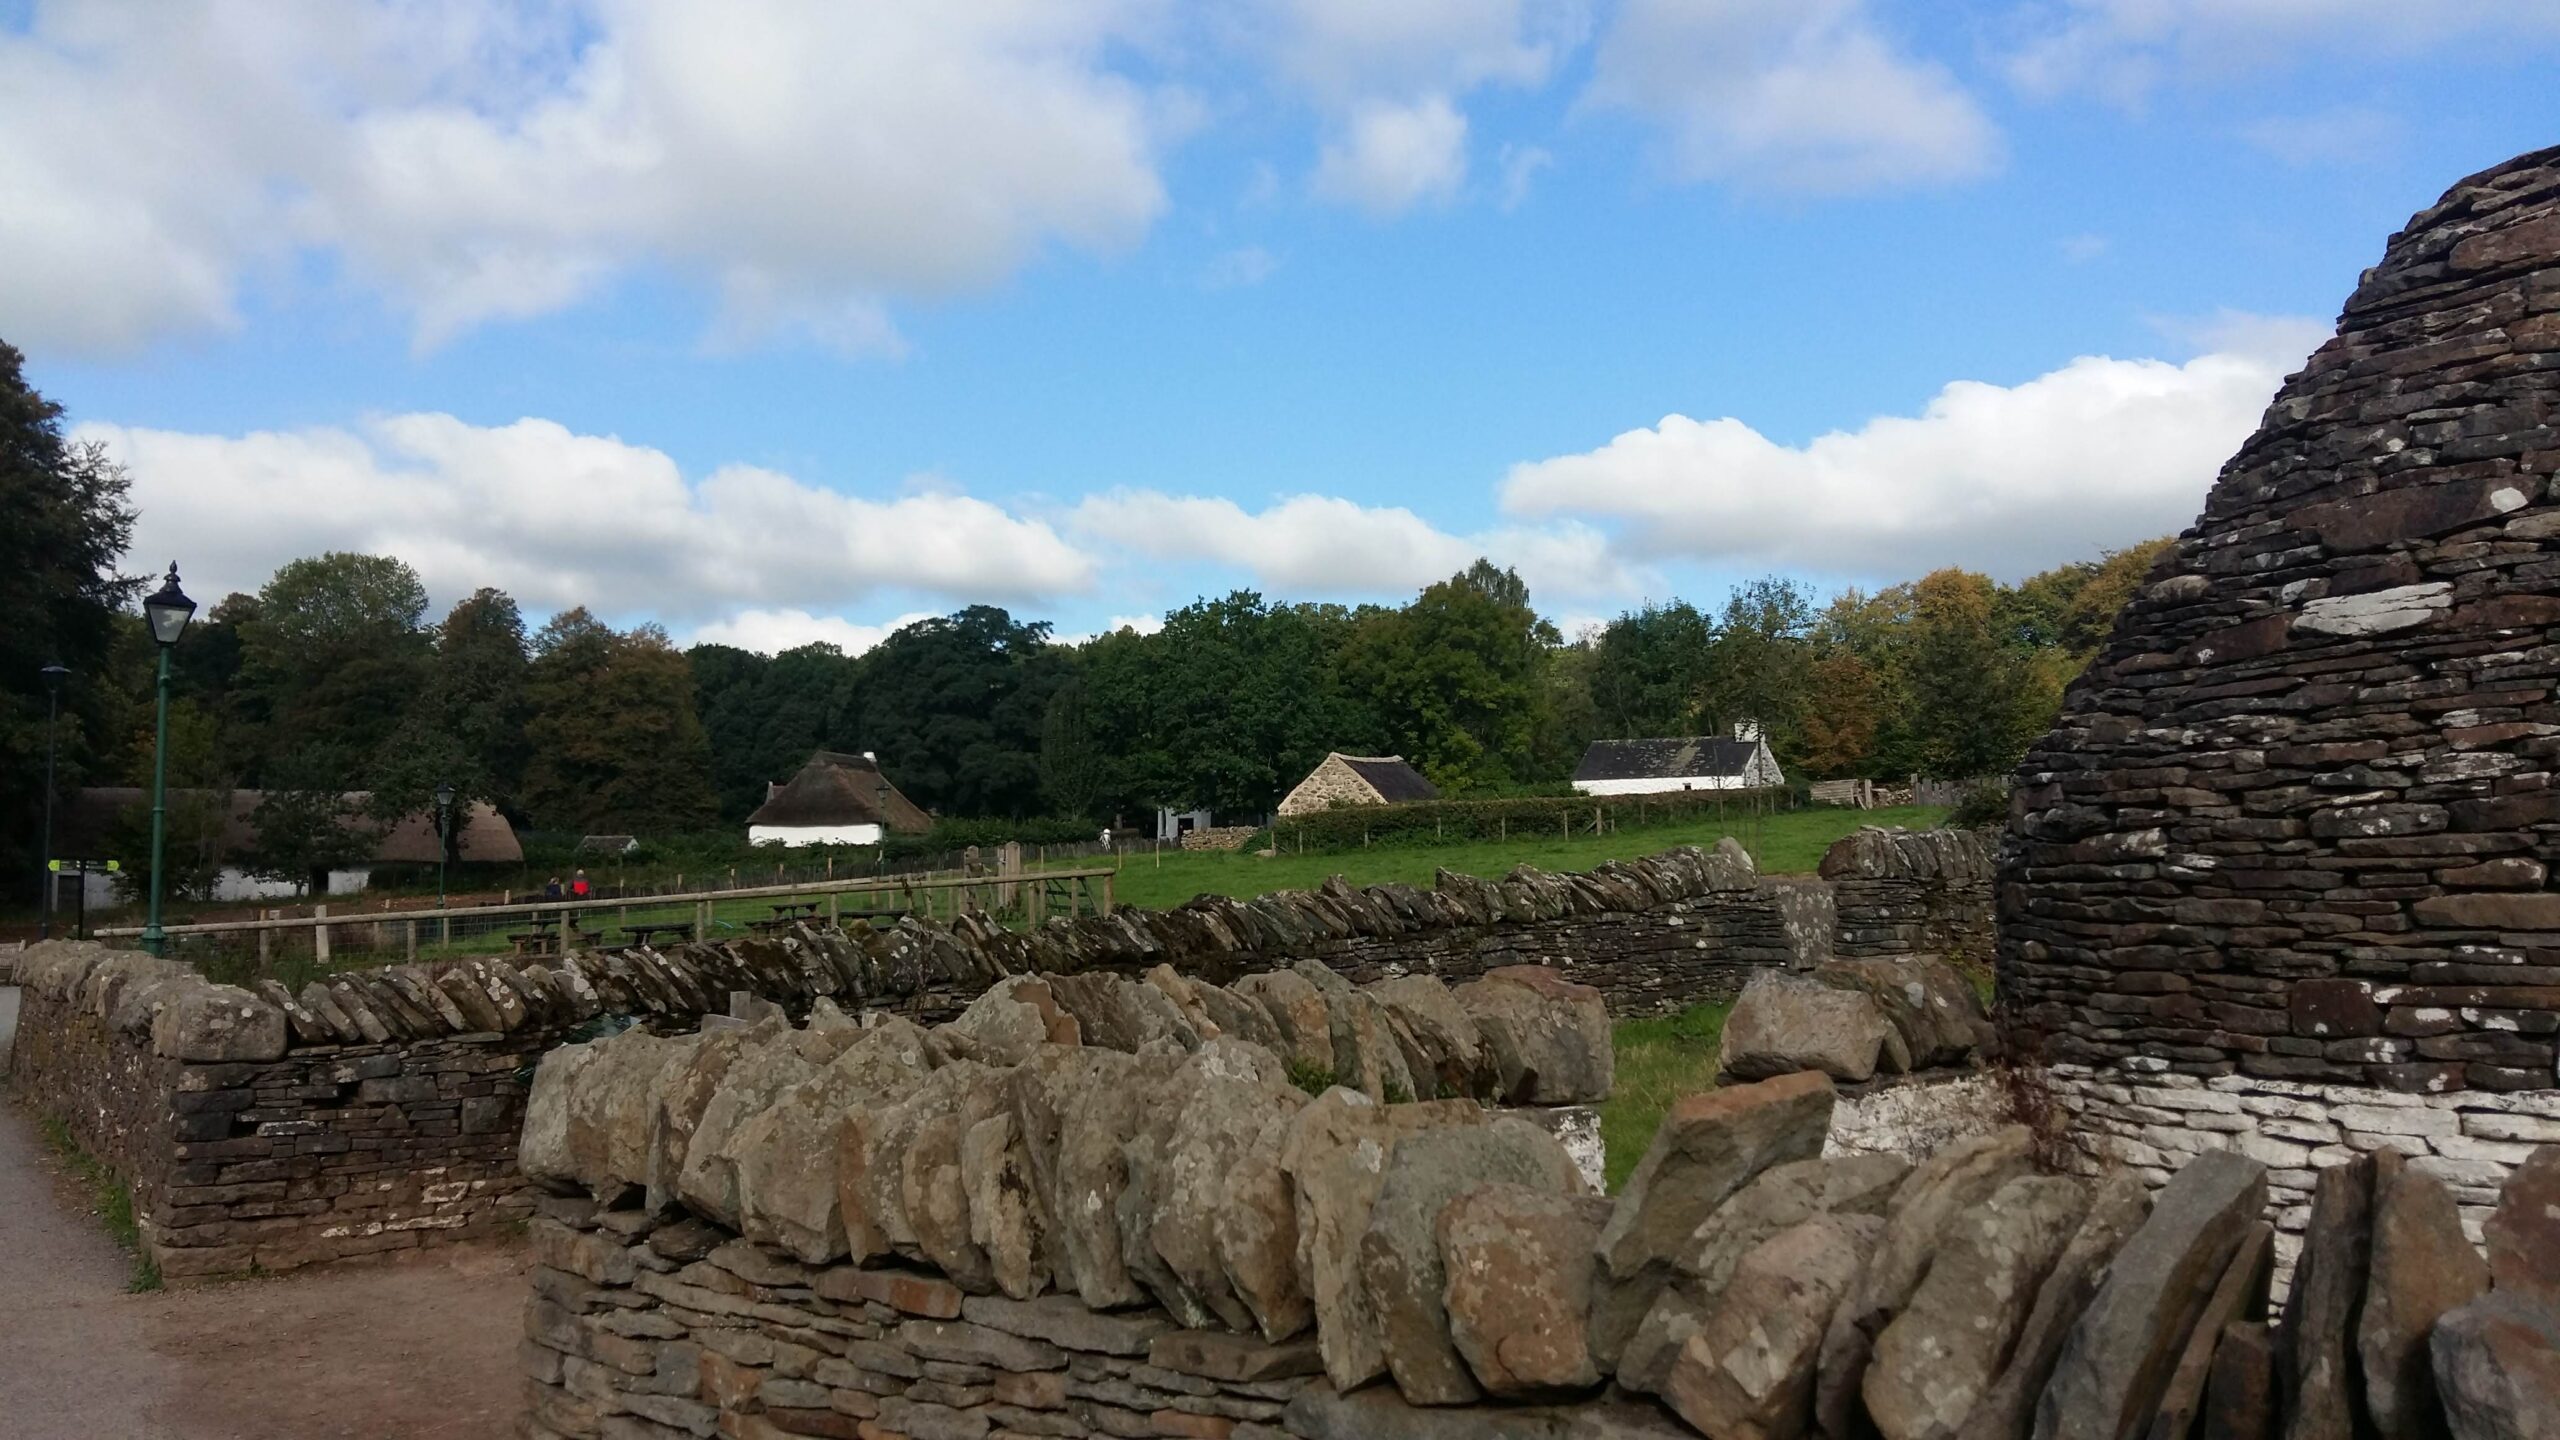 Outdoor view of the St Fagans museum including historic buildings, green gardens and stone fences